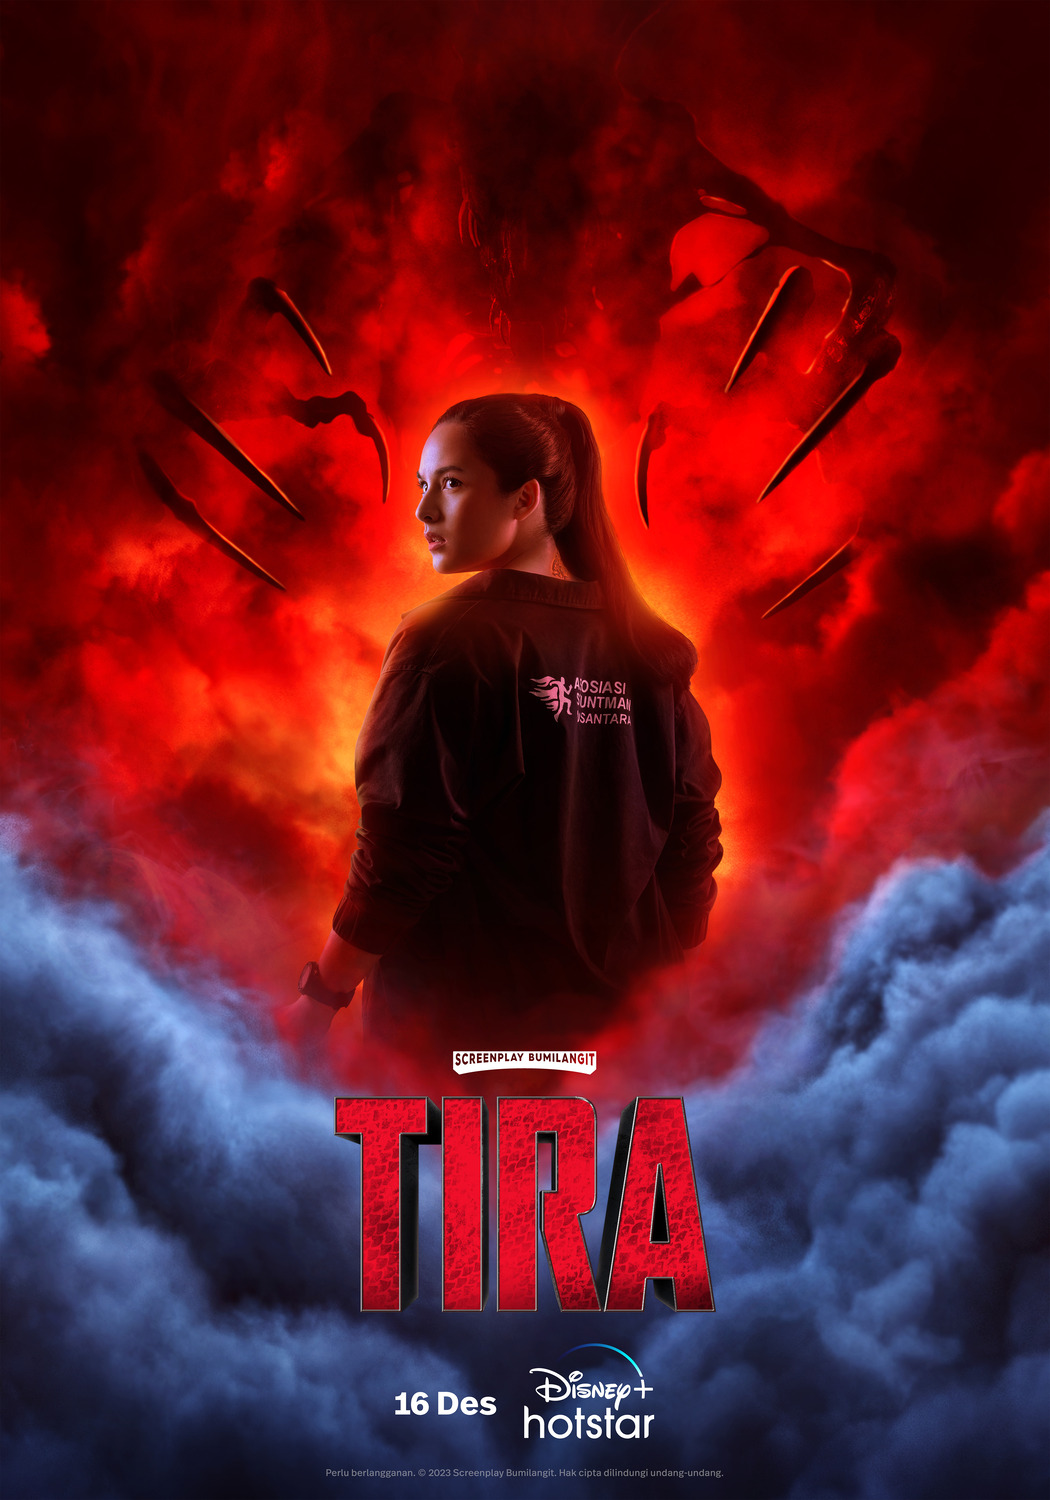 Extra Large TV Poster Image for Tira (#2 of 12)